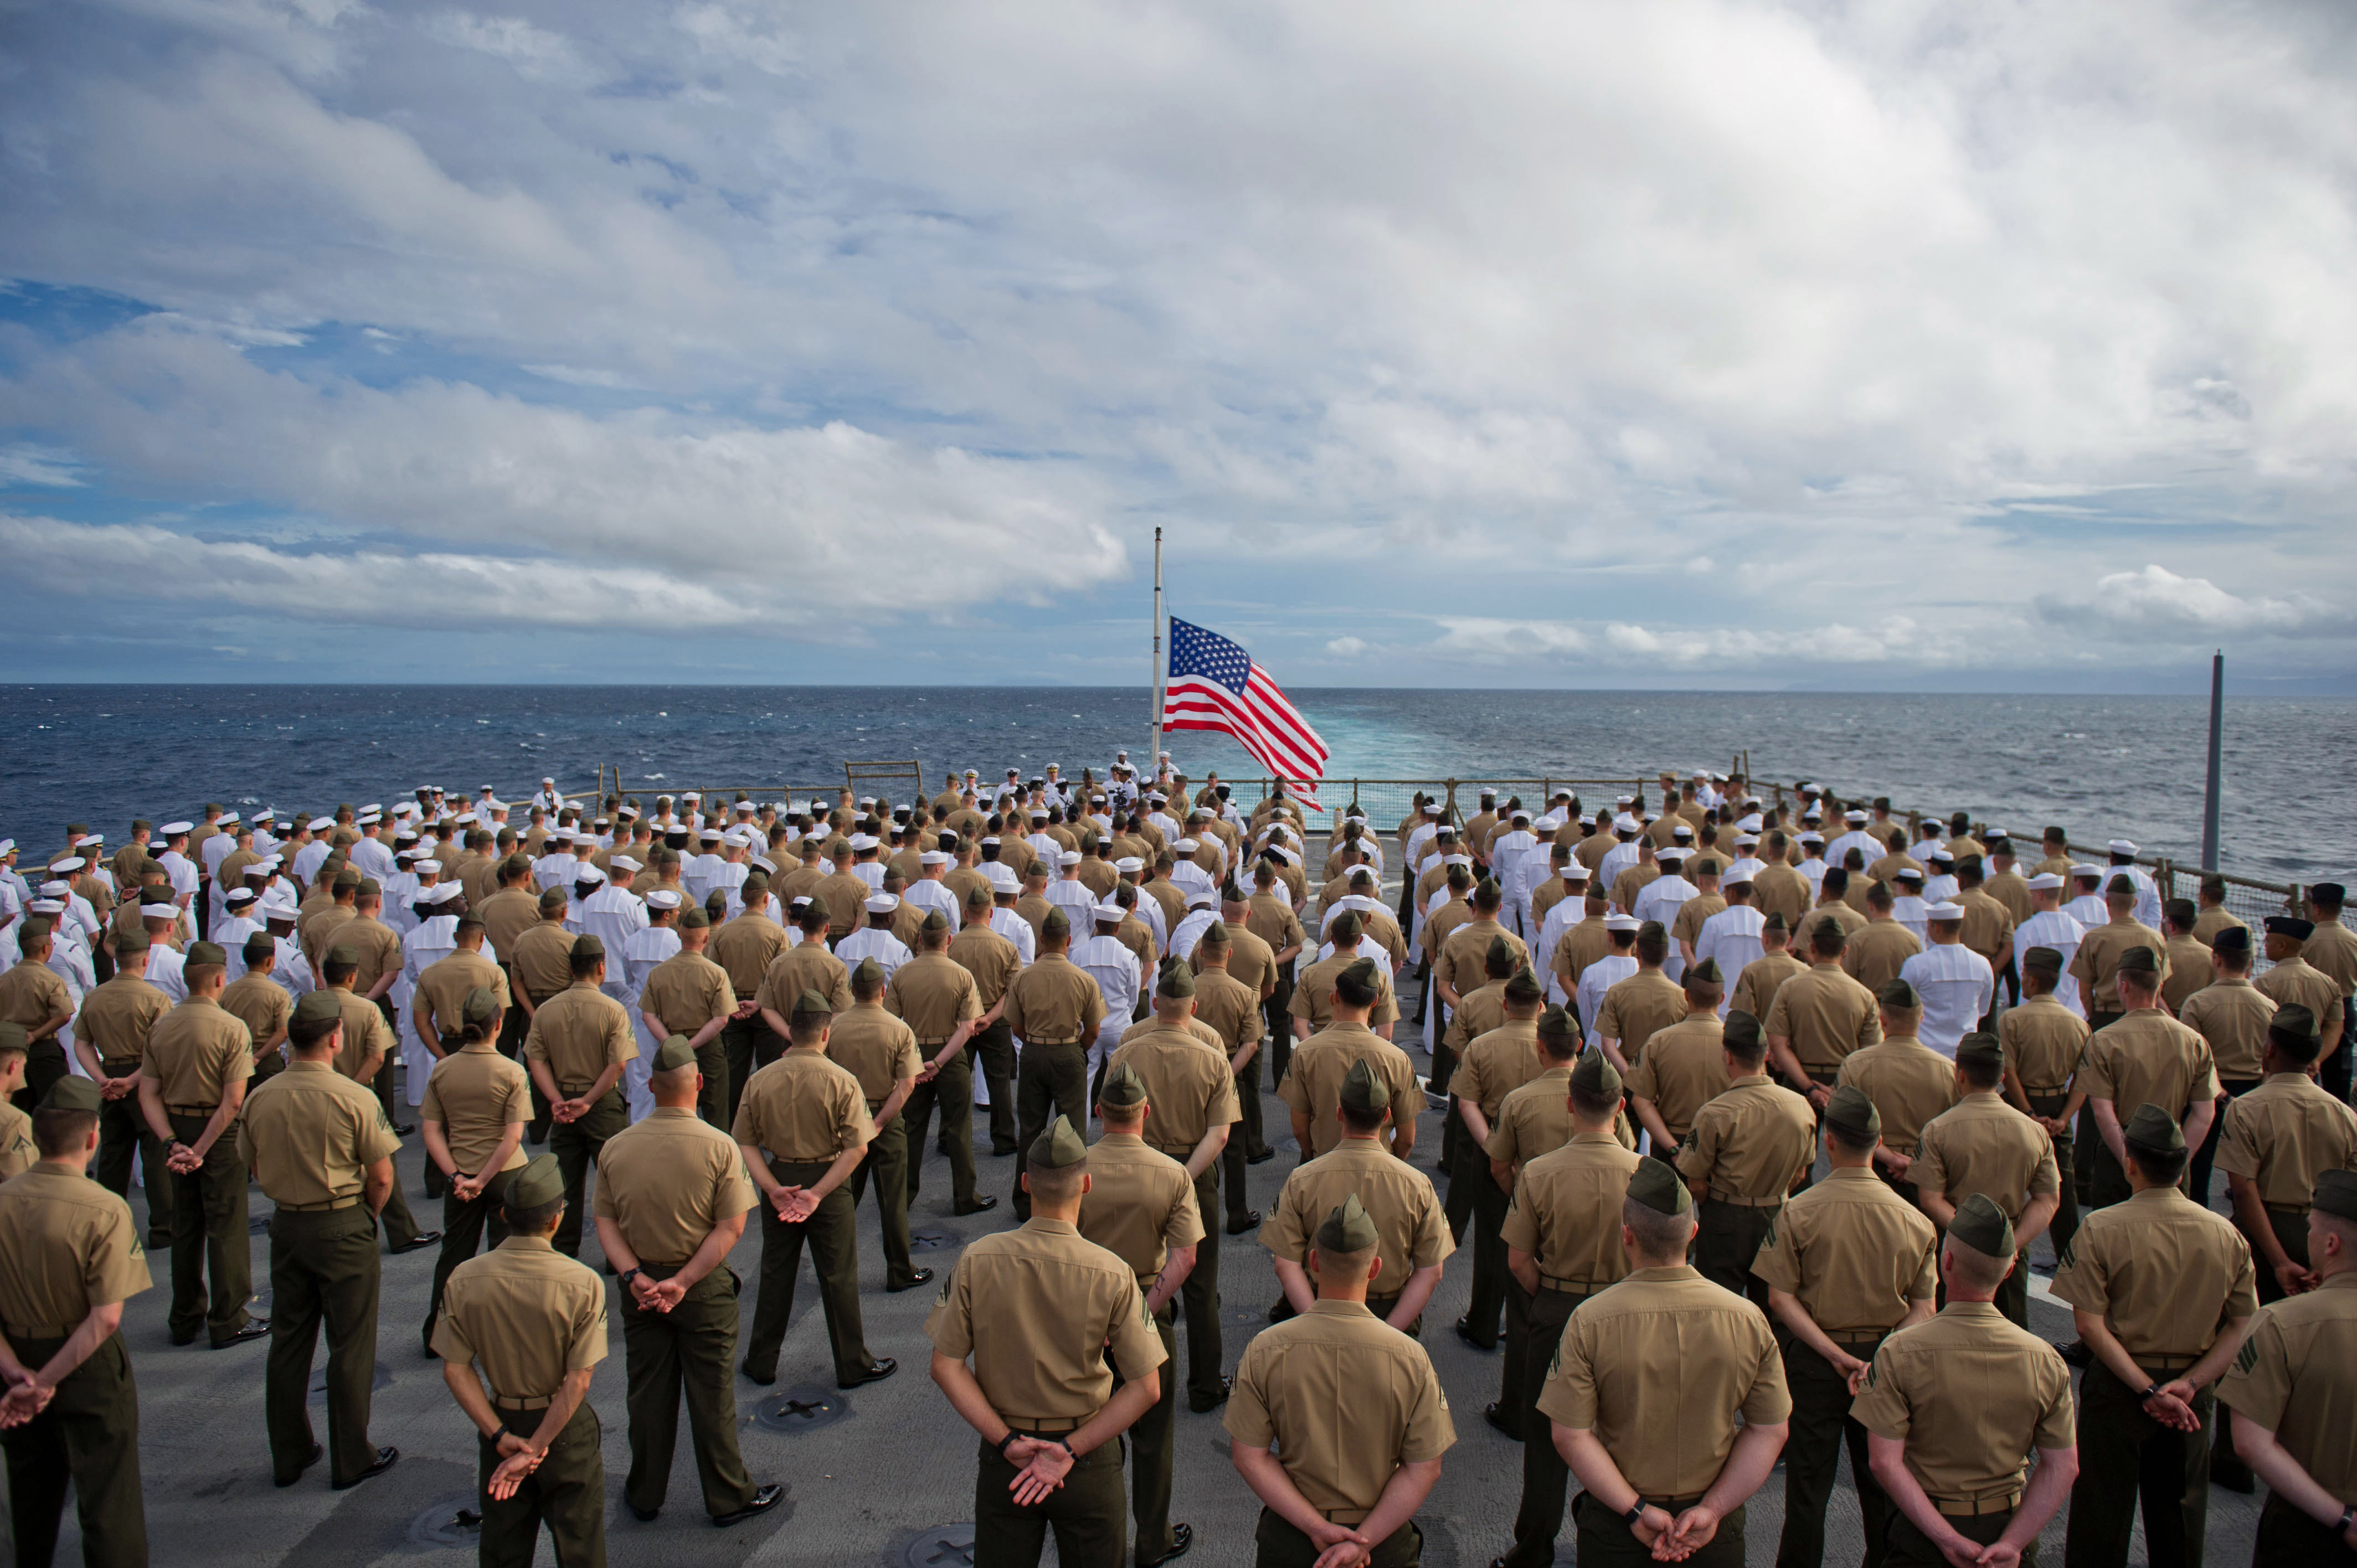 Defense.gov News Photo 111207-M-IS773-005 - Marines with the 11th Marine Expeditionary Unit and sailors aboard the USS Pearl Harbor LSD 52 stand in formation during a 70th anniversary